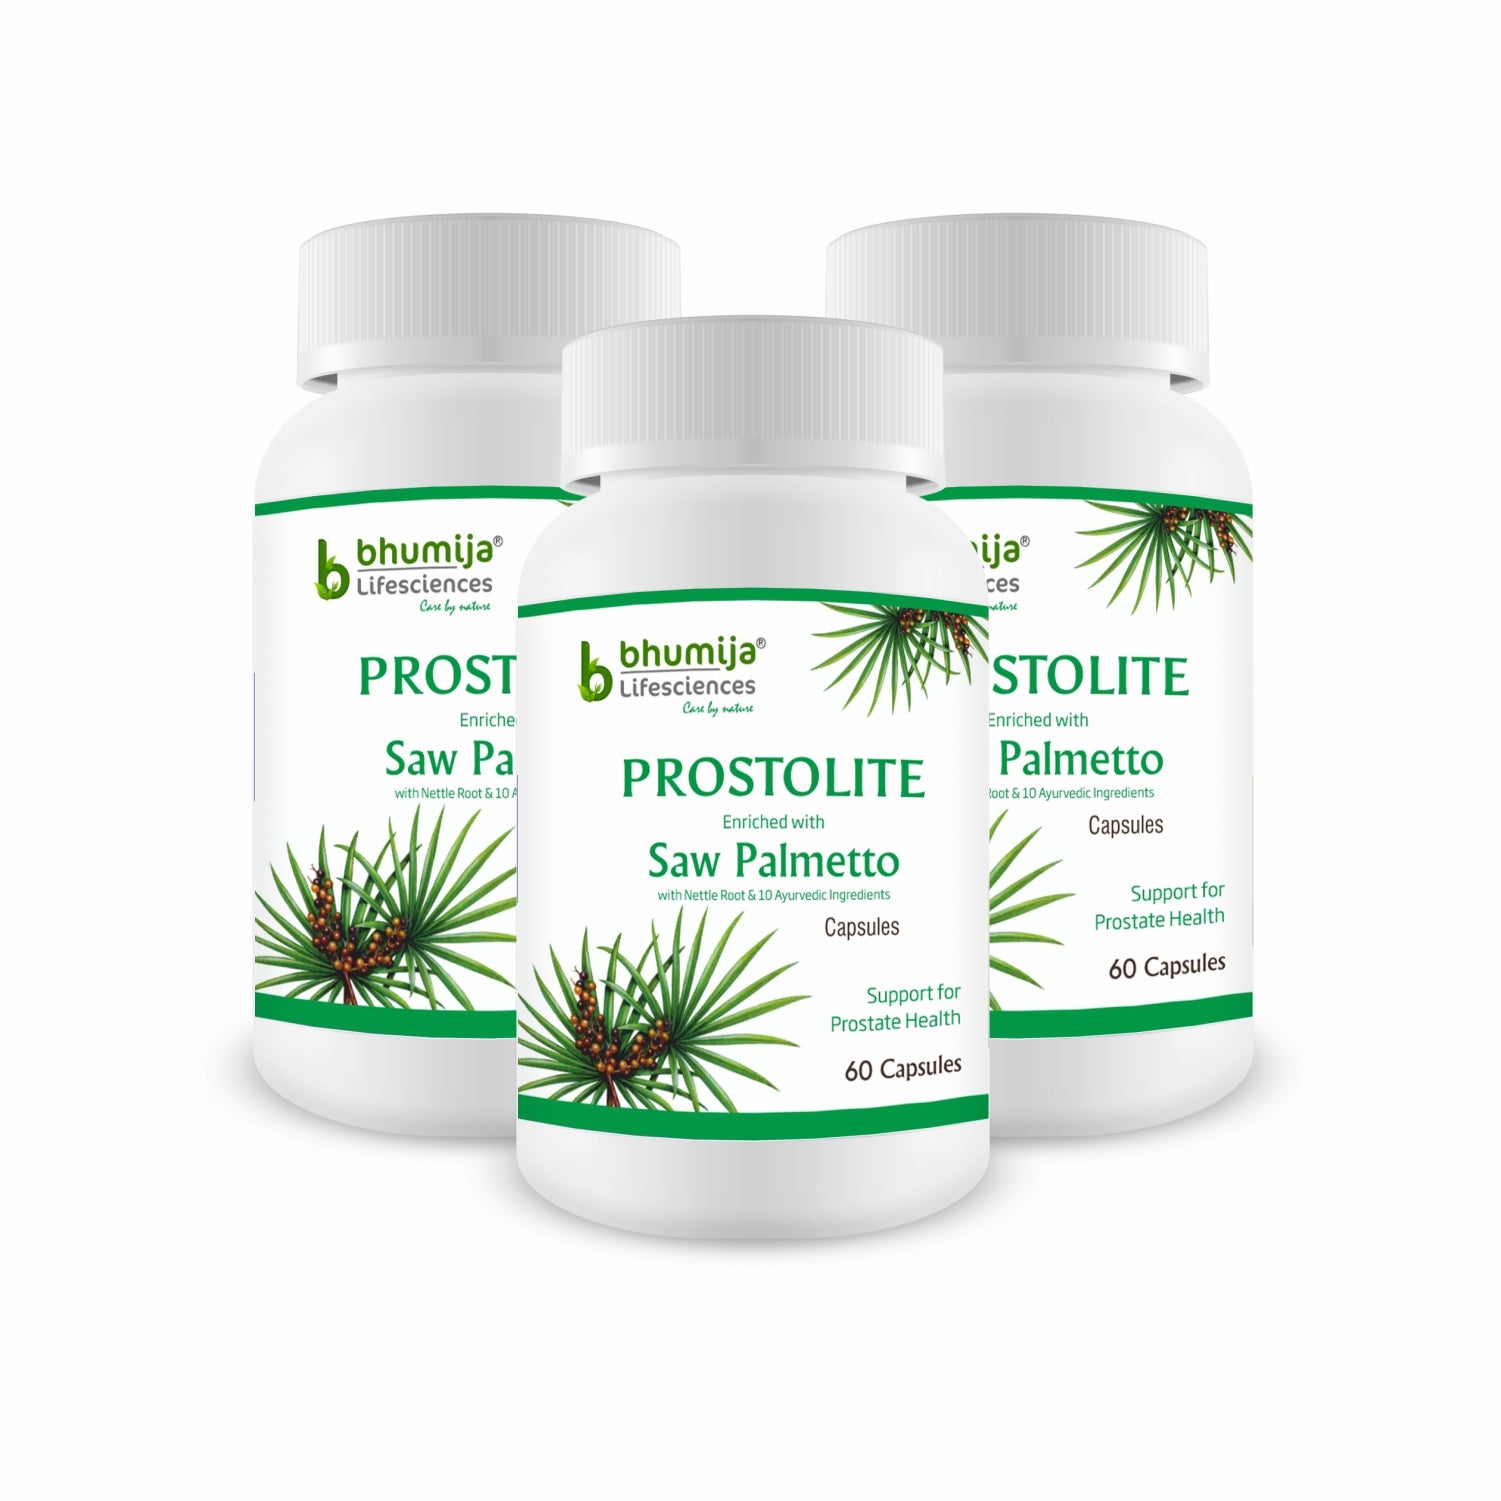 Bhumija Lifesciences Saw Palmetto with Nettle Root (Prostolite) 60 Capsules-For Prostate Health